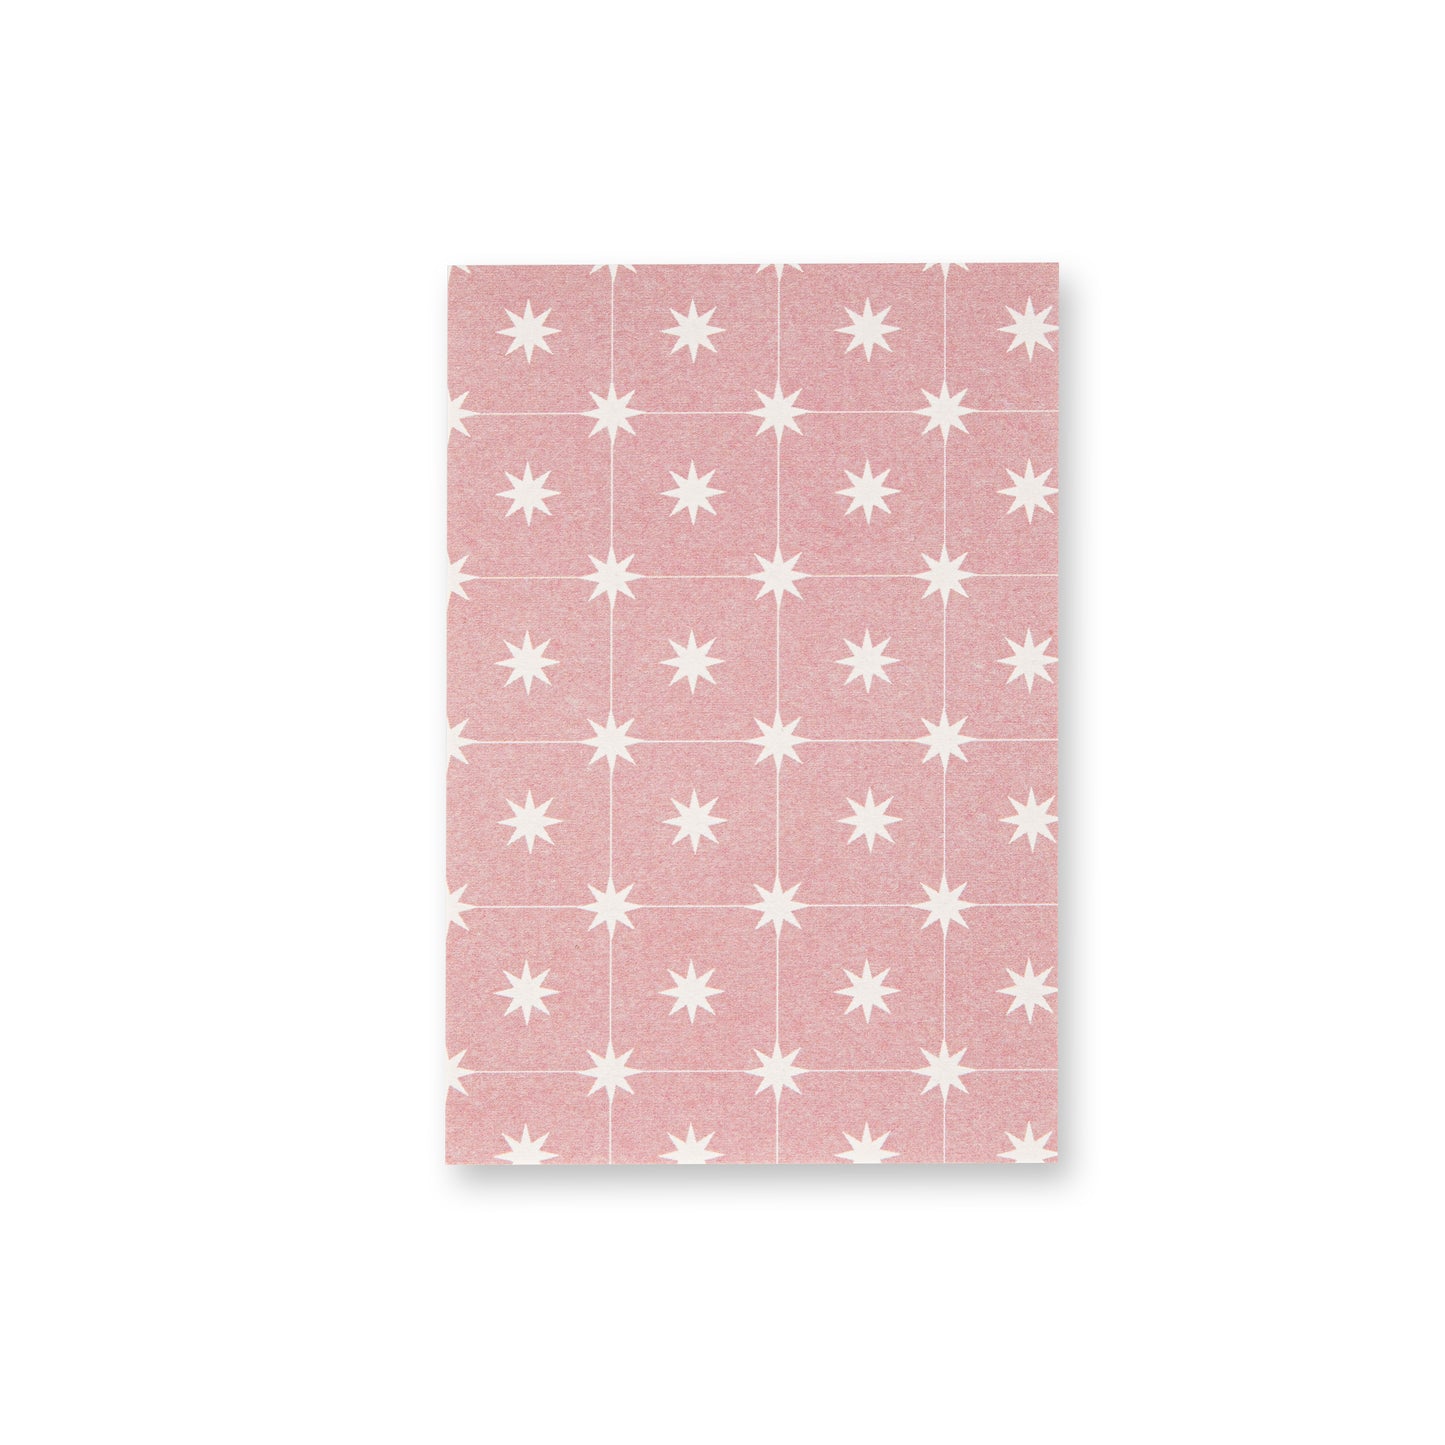 Sweetness Cranberry Cheese Scrapbook Paper - 50 sheets